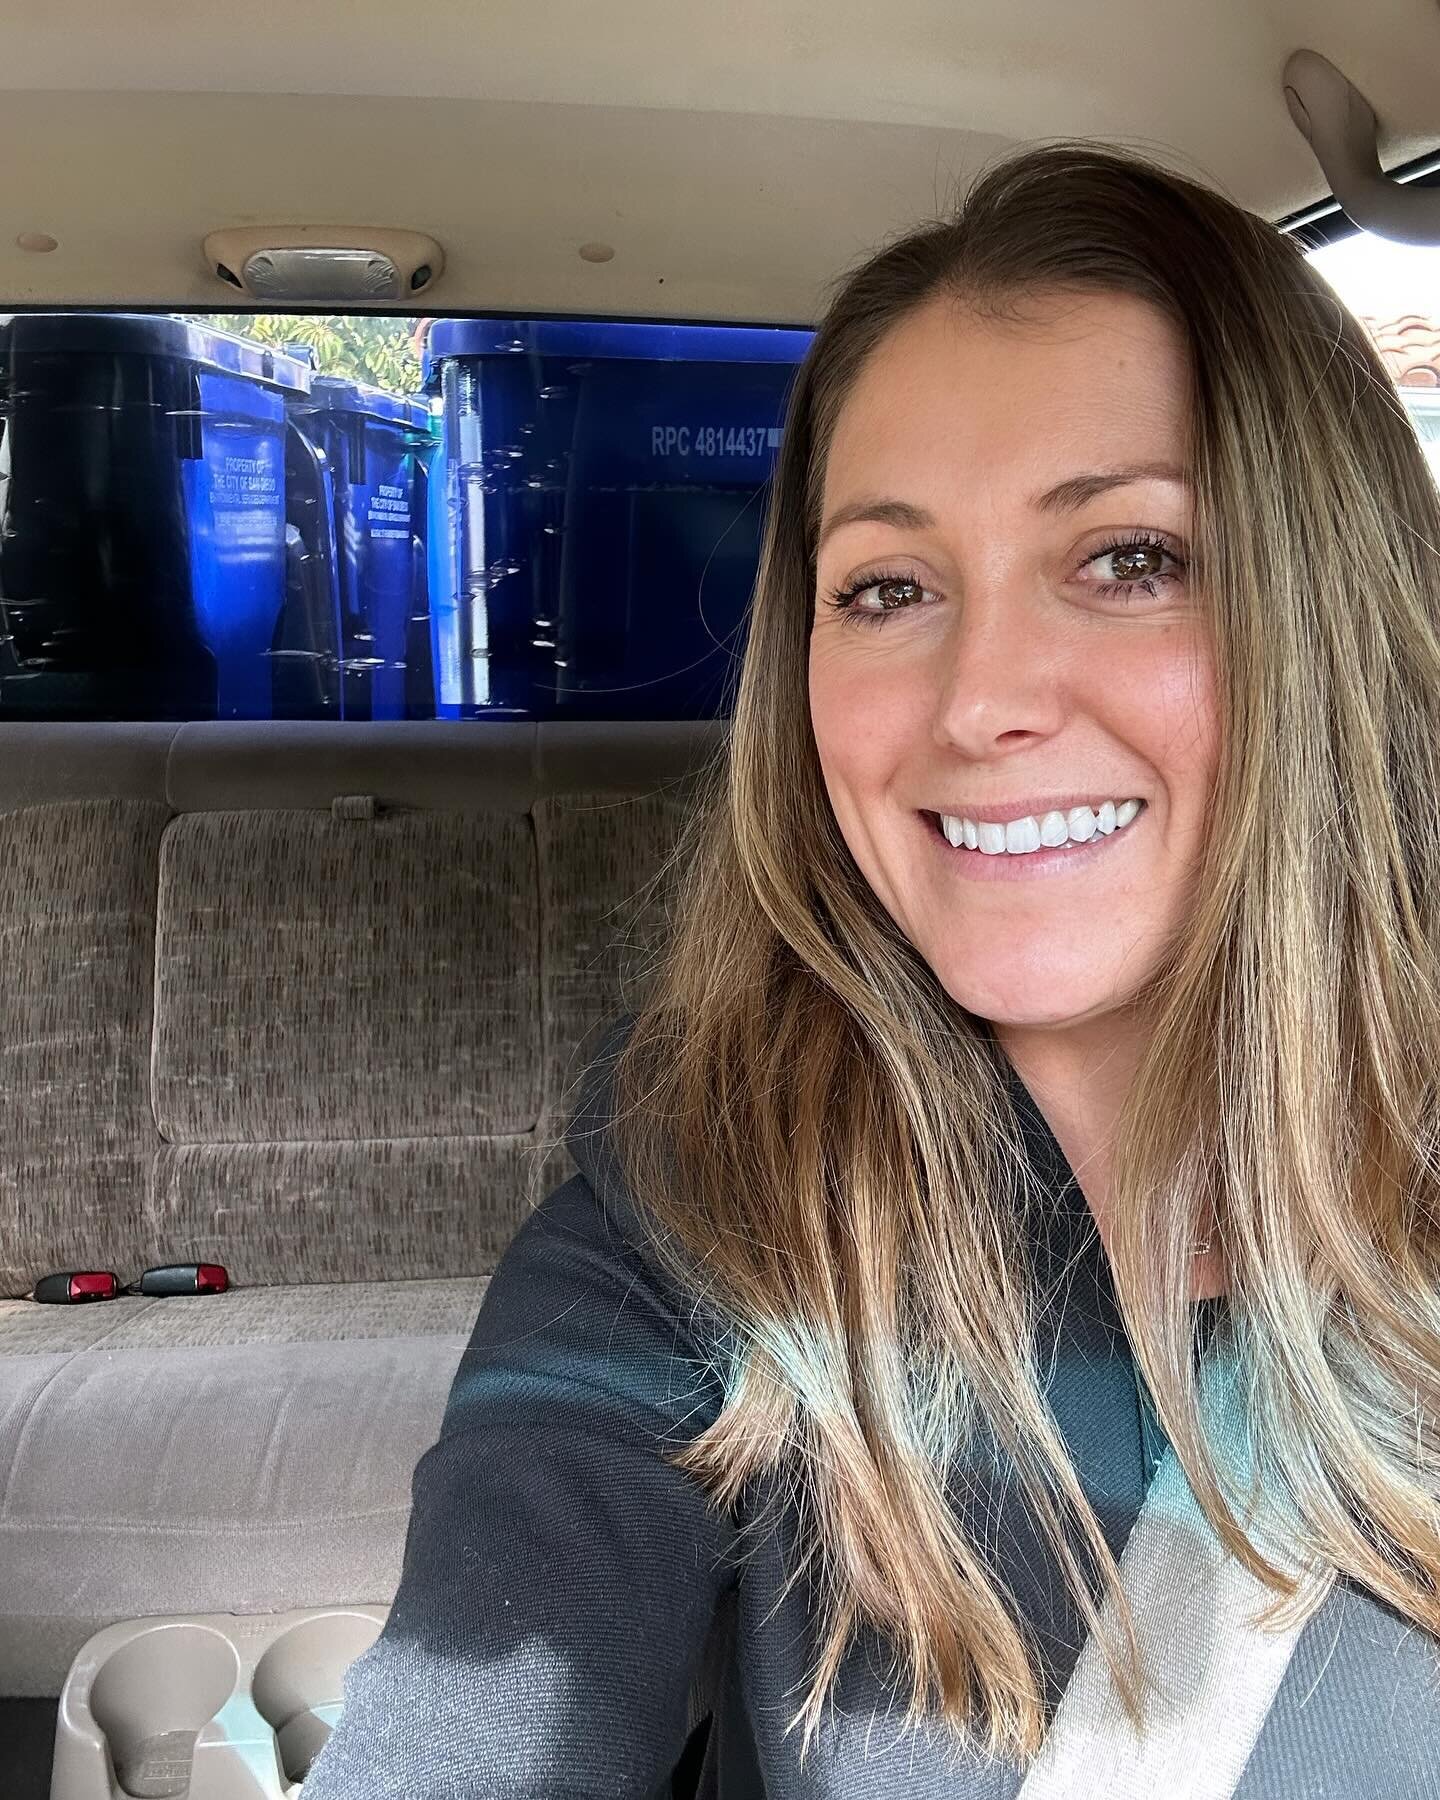 Just another work day in ballet flats 🥿, and a blazer driving our 1987 f350 with trash cans in the back. Off to meet a new client for staging and then drop new trash cans at our rental. It&rsquo;s not always glamorous, but it sure is 😆 funny. I do 